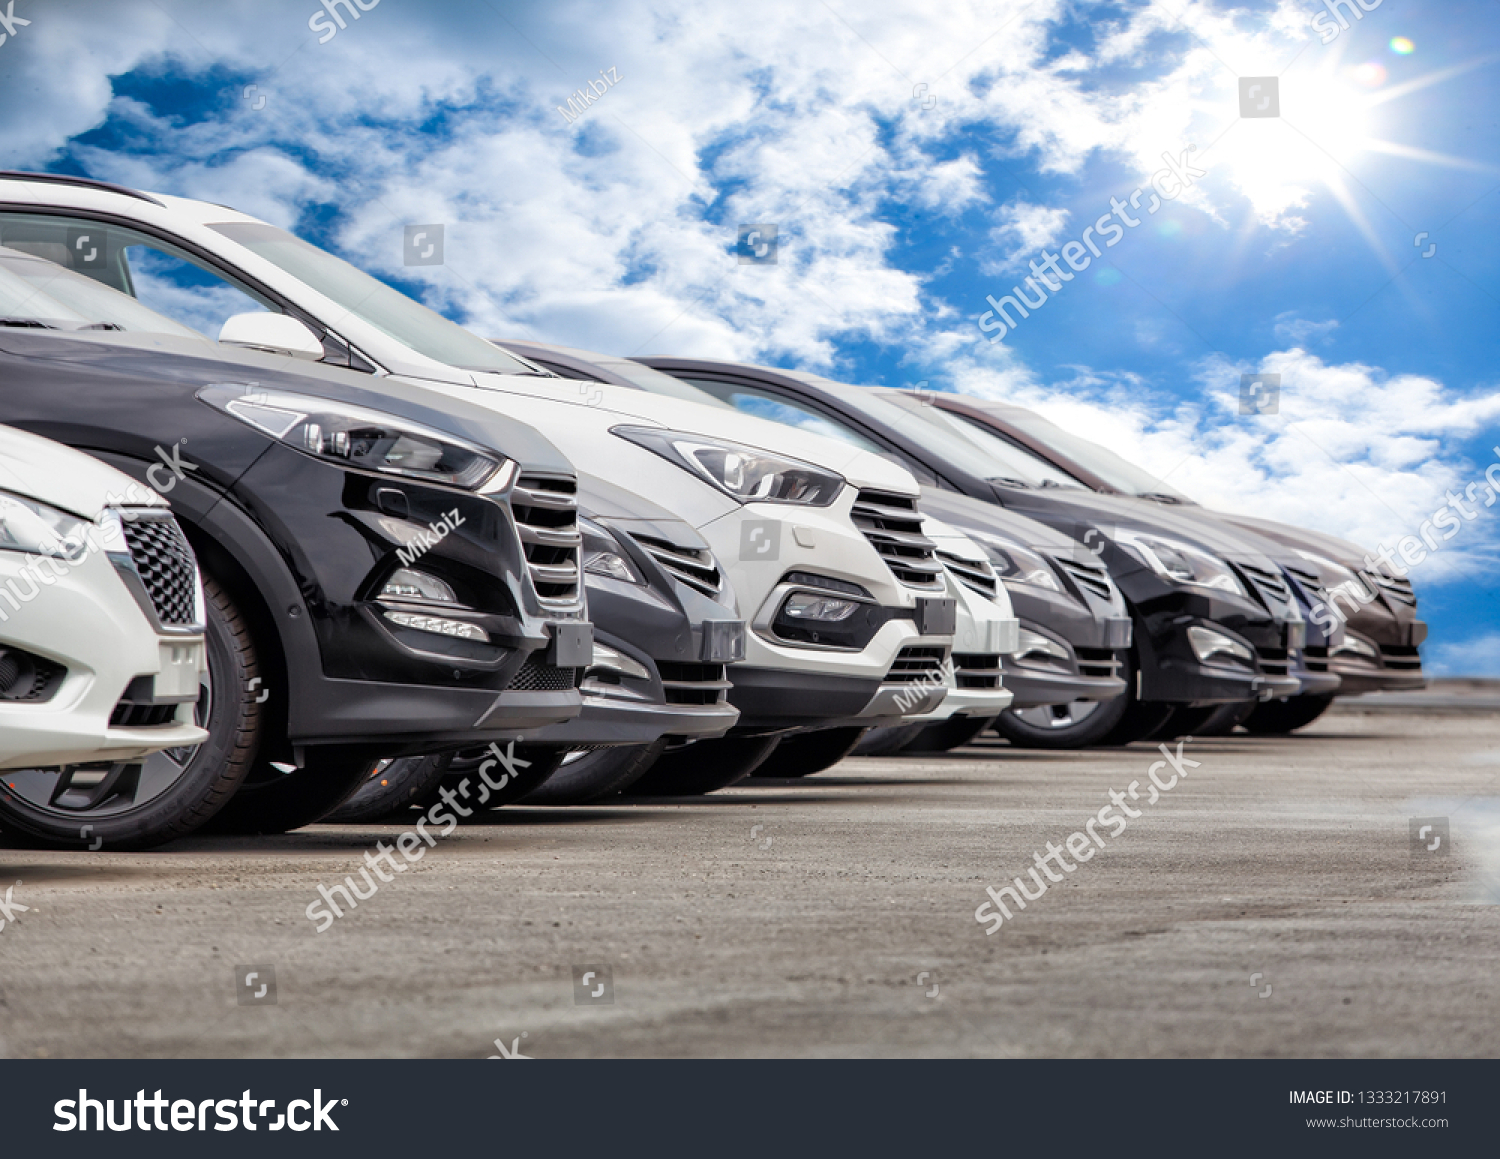 Cars For Sale Stock Lot Row. Car Dealer Inventory #1333217891